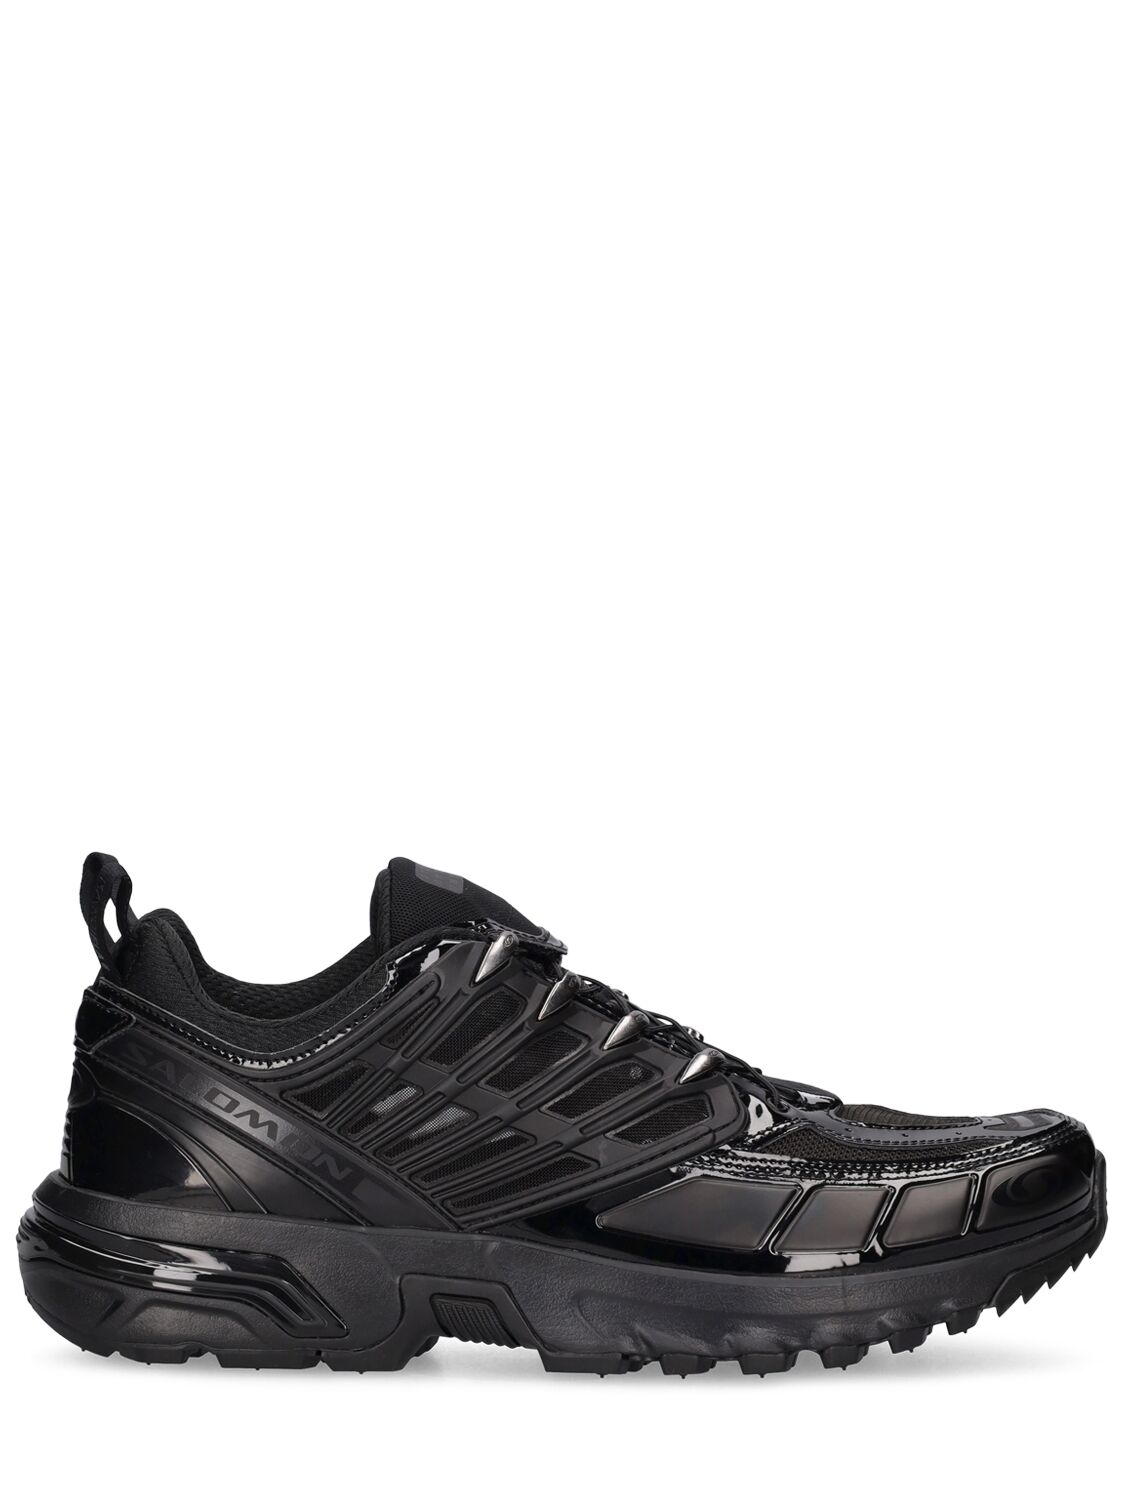 Mm6 Maison Margiela Acs Pro Colorblock Caged Runner Sneakers In Veryblack